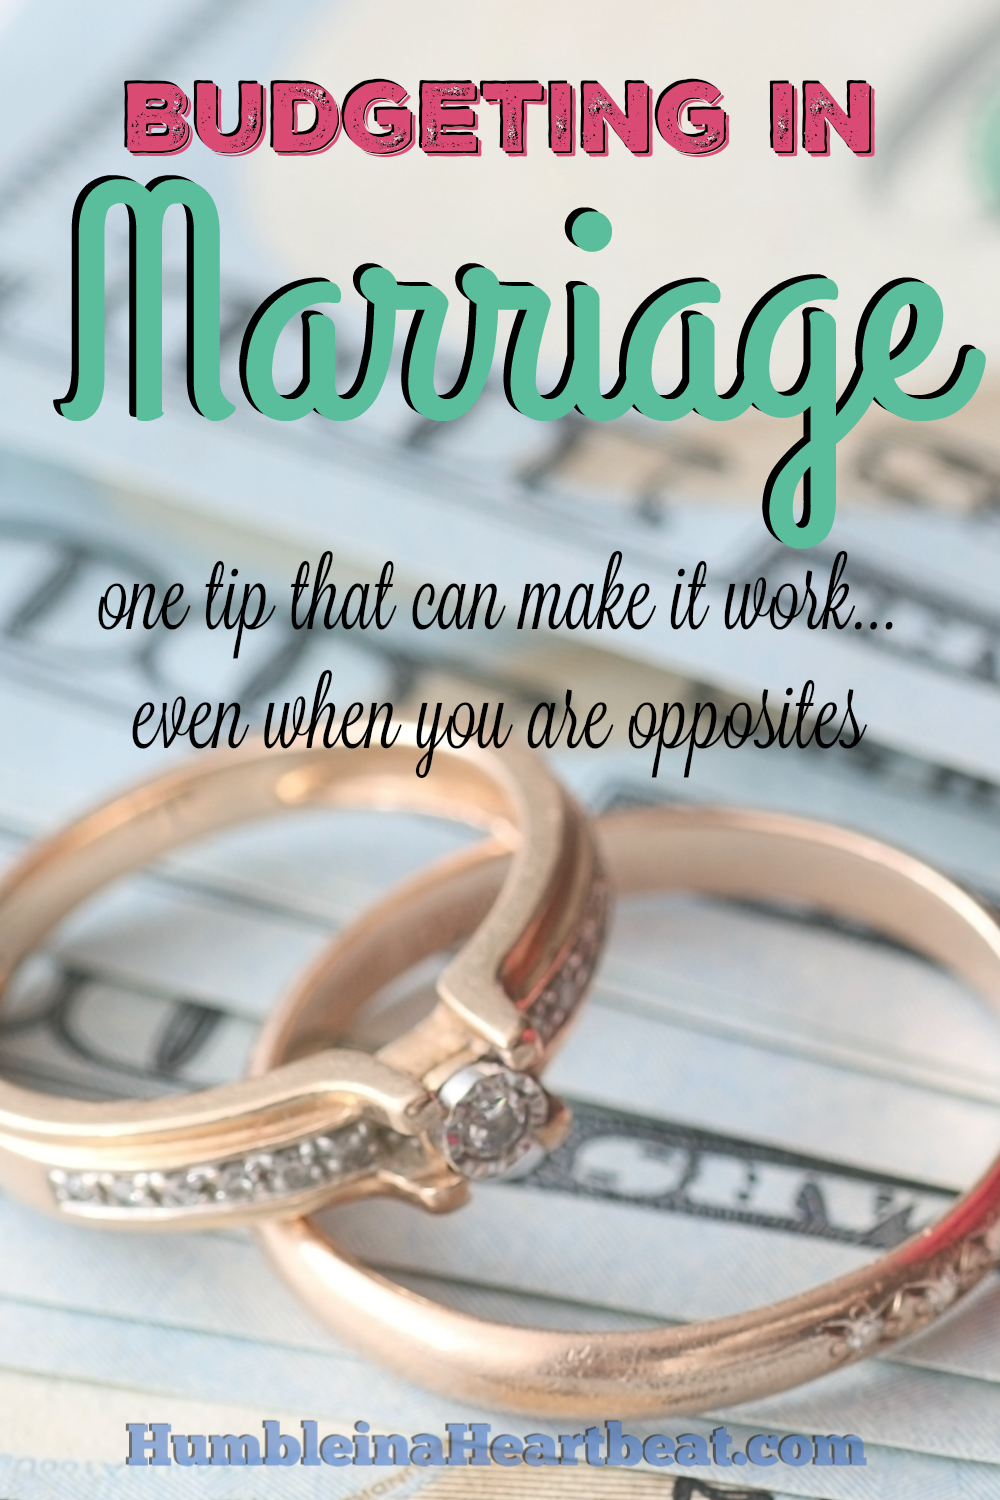 Have you had to deal with money issues in your marriage? You can work through these issues and have less conflict by simply doing one thing. It works for my marriage, and I'm sure it can work in yours.